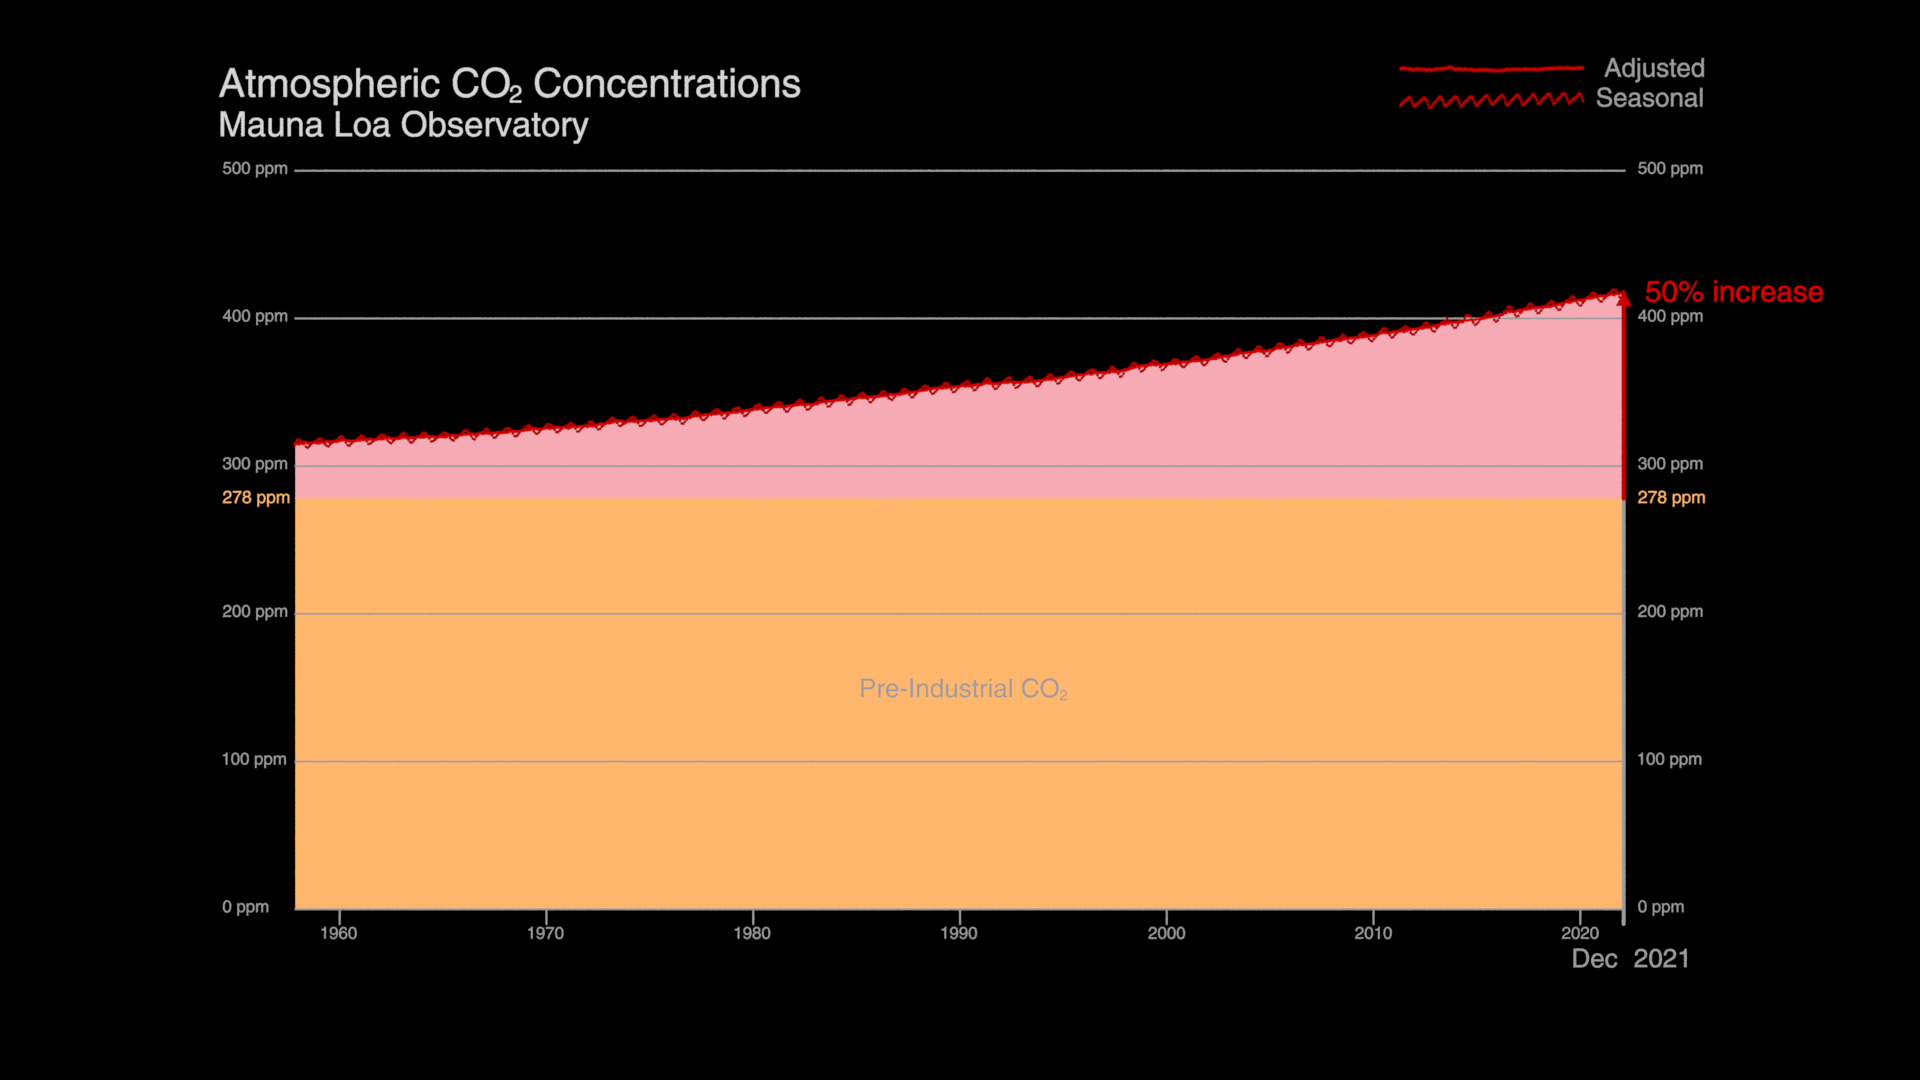 Timeplot of increase of atmospheric Carbon Dioxide (CO2) concentrations relative to the pre-industrial CO2 long-term mean value of 278ppm. During 2021, atmospheric CO2 concentrations reached a record-level increase of 50% relative to pre-industrial CO2 levels. This version is created with a dark background.